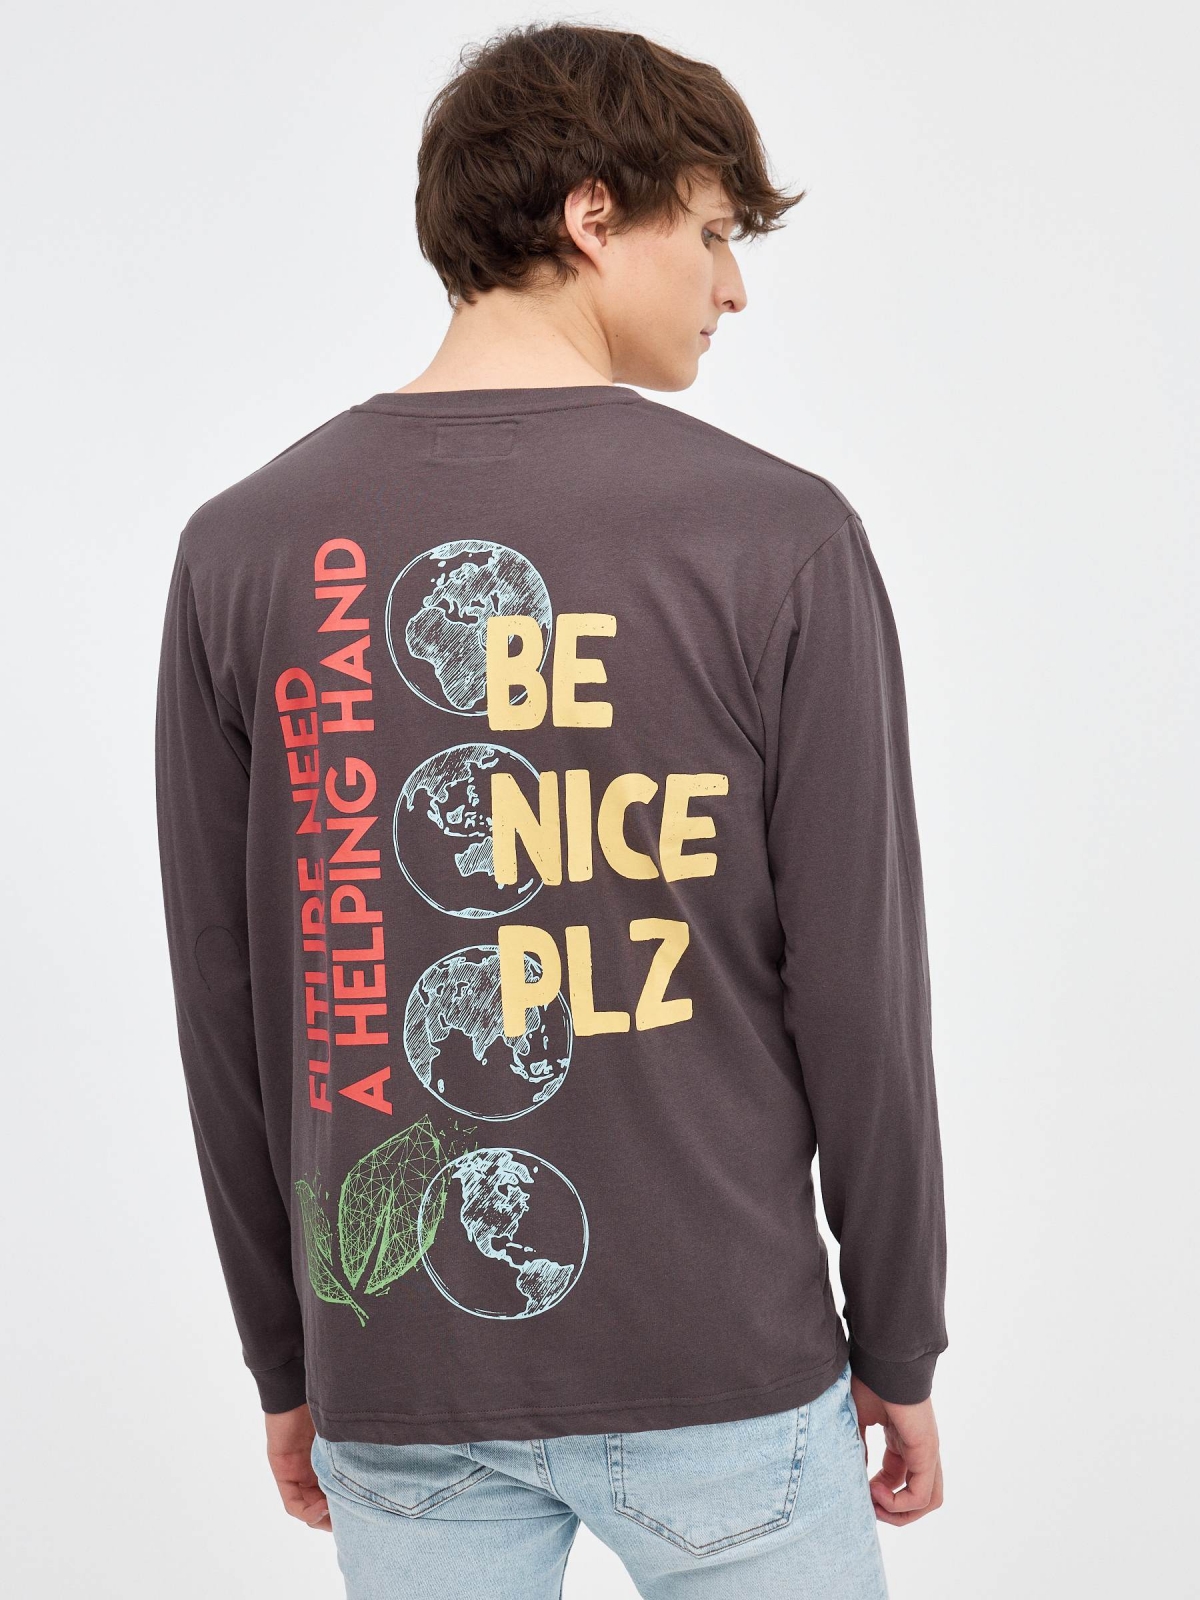 Be Nice Plz T-shirt dark grey middle back view